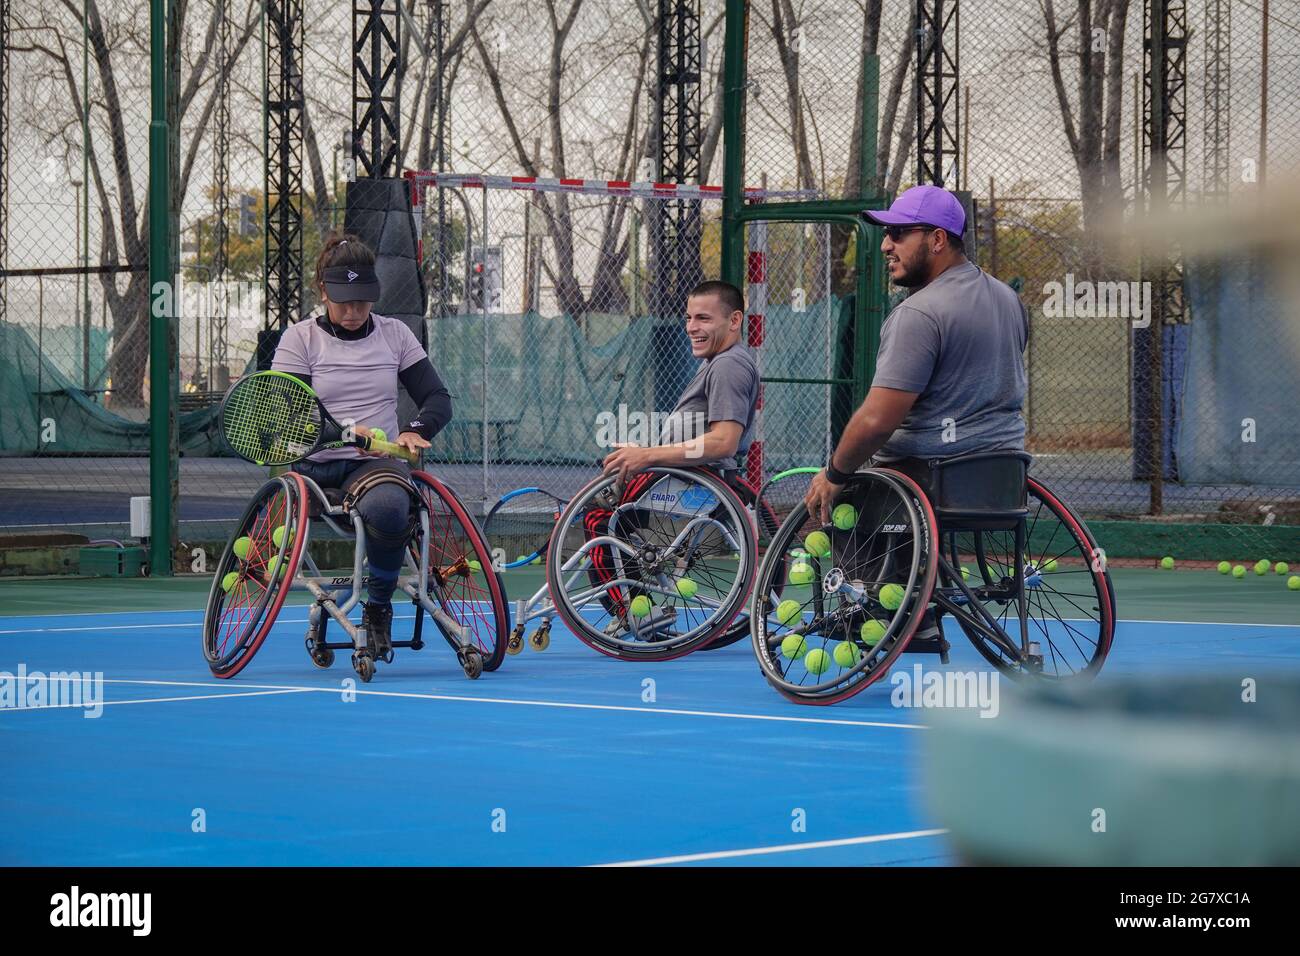 Buenos Aires, Argentina. 15th July, 2021. Tennis player Florencia Moreno (l-r) with her teammates Ezequiel Casco and Agustin Ledesma from Argentina during a training session. Moreno is the first Argentine woman to qualify for the Paralympics in wheelchair tennis. 'To be part of it is a dream,' says the tennis player. Credit: Florencia Martin/dpa/Alamy Live News Stock Photo